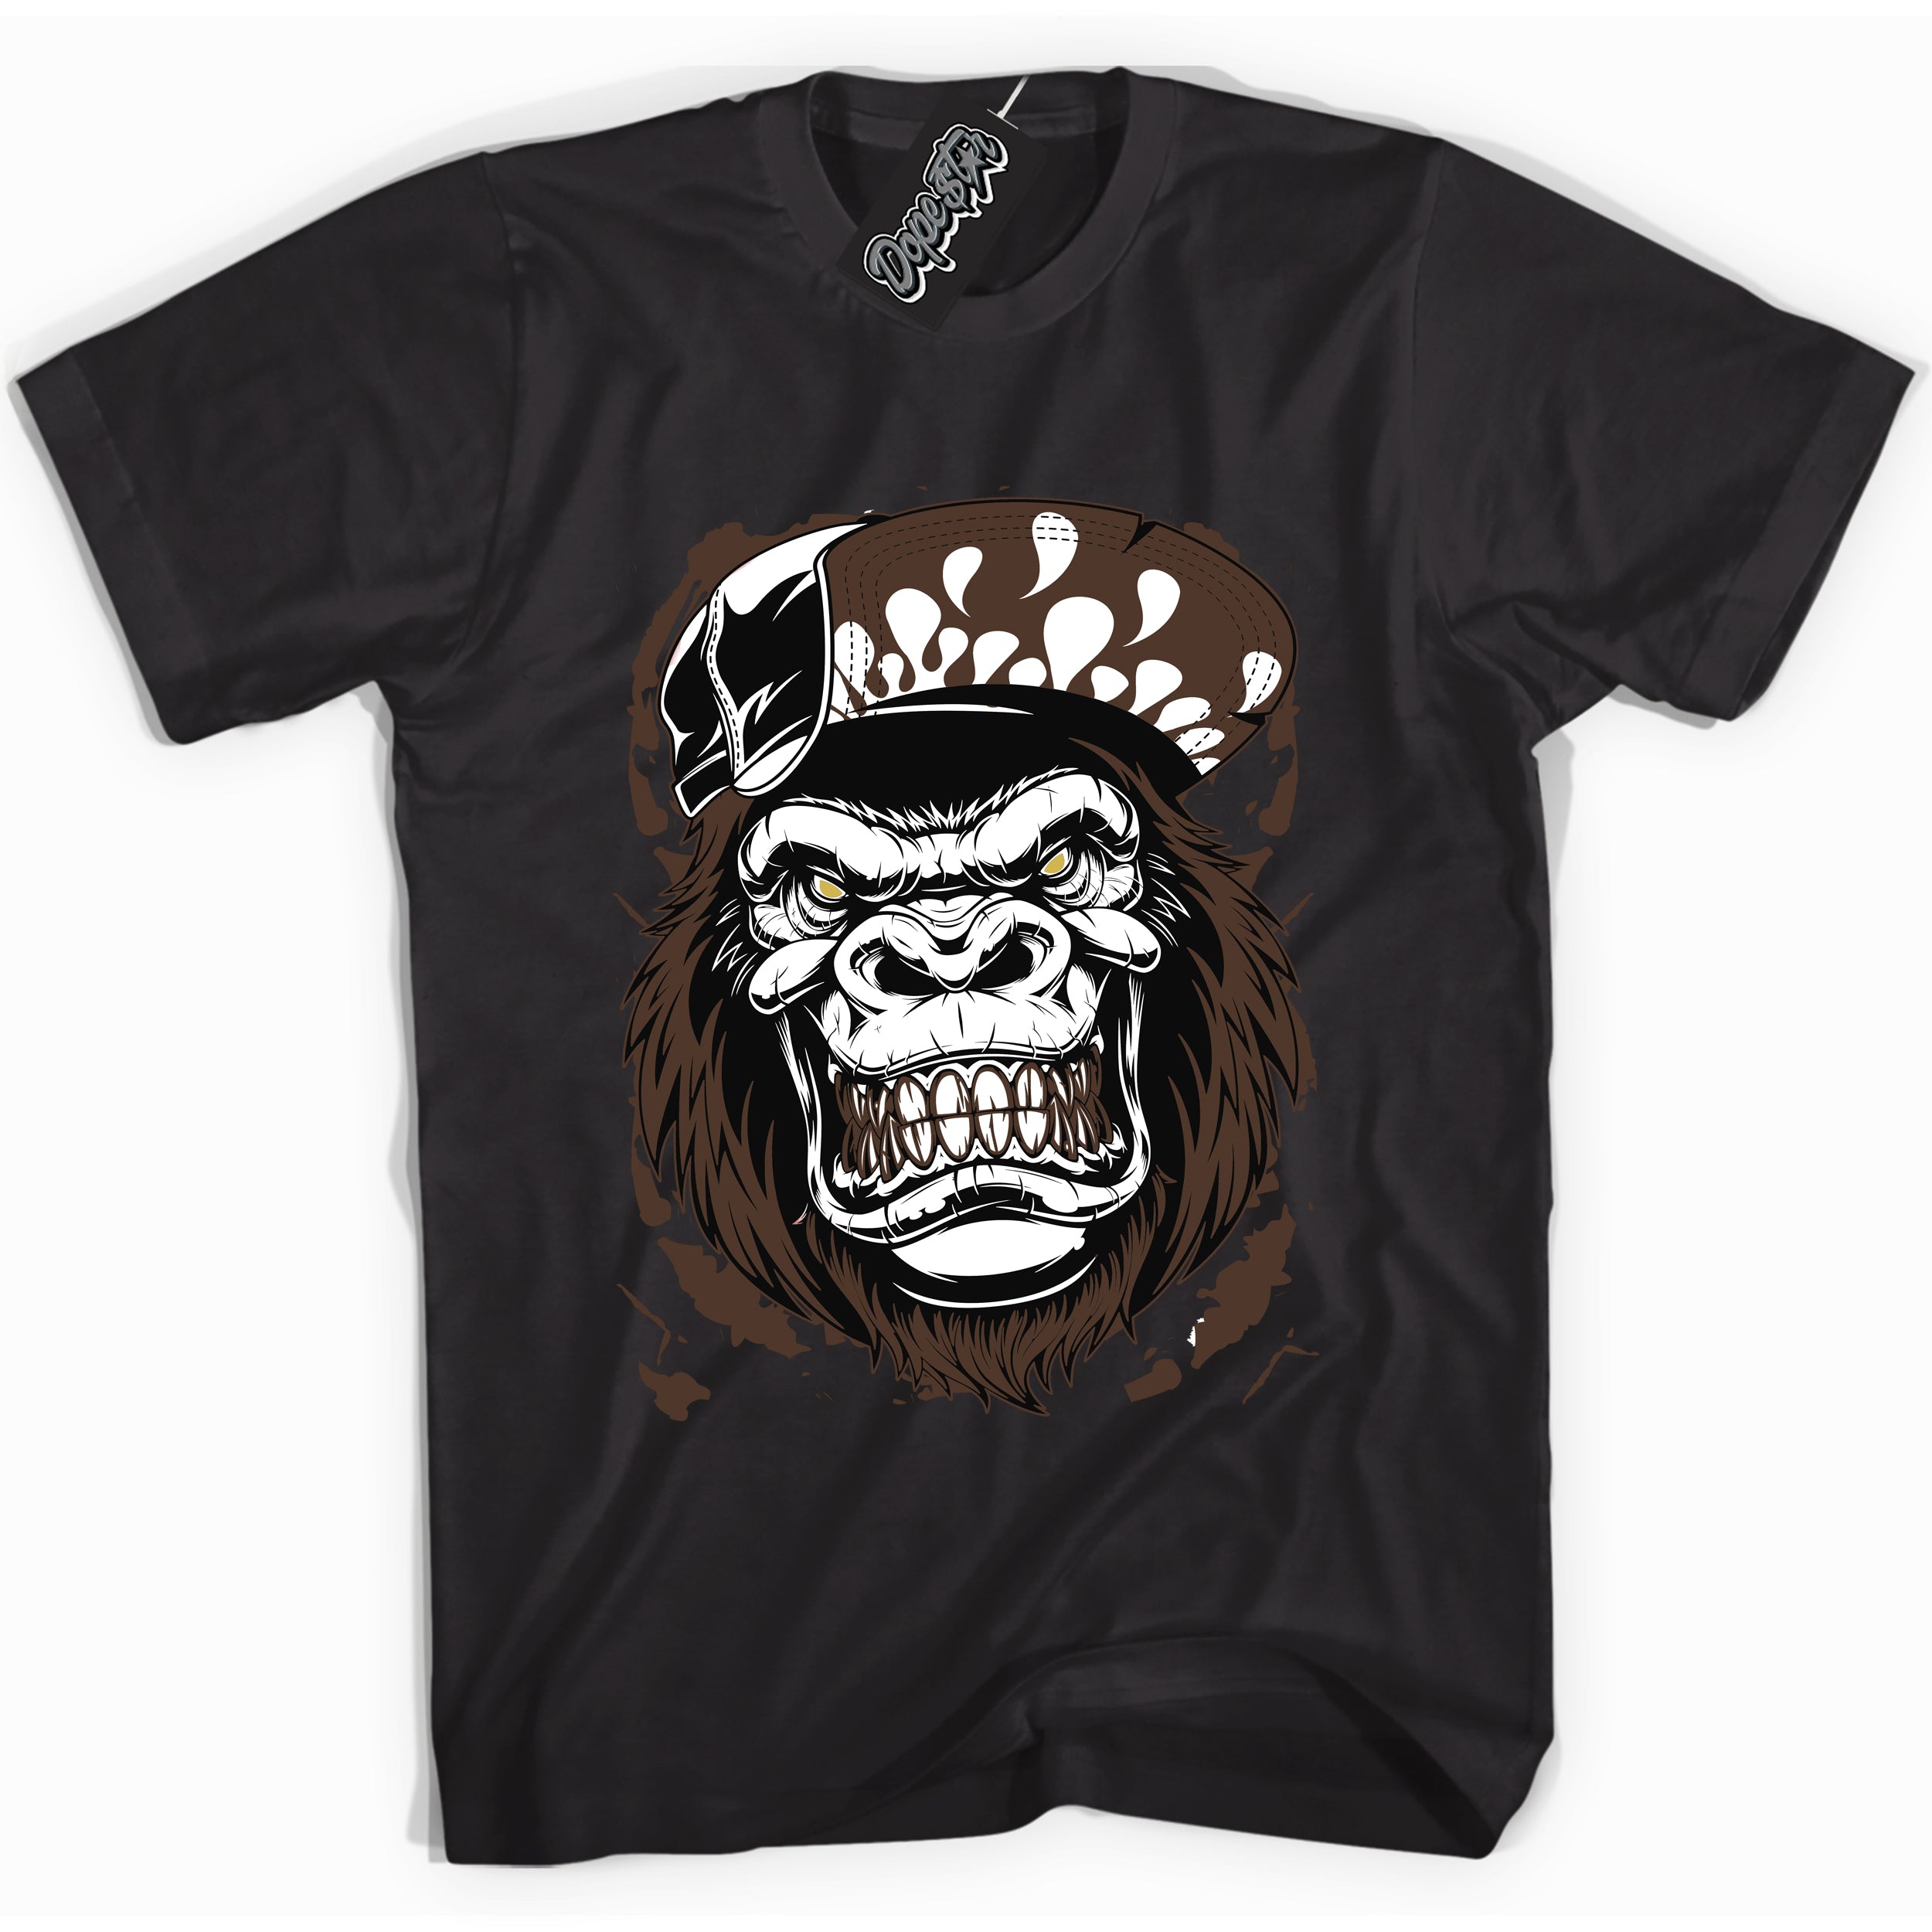 Cool Black graphic tee with “ Gorilla Beast ” design, that perfectly matches Palomino 1s sneakers 